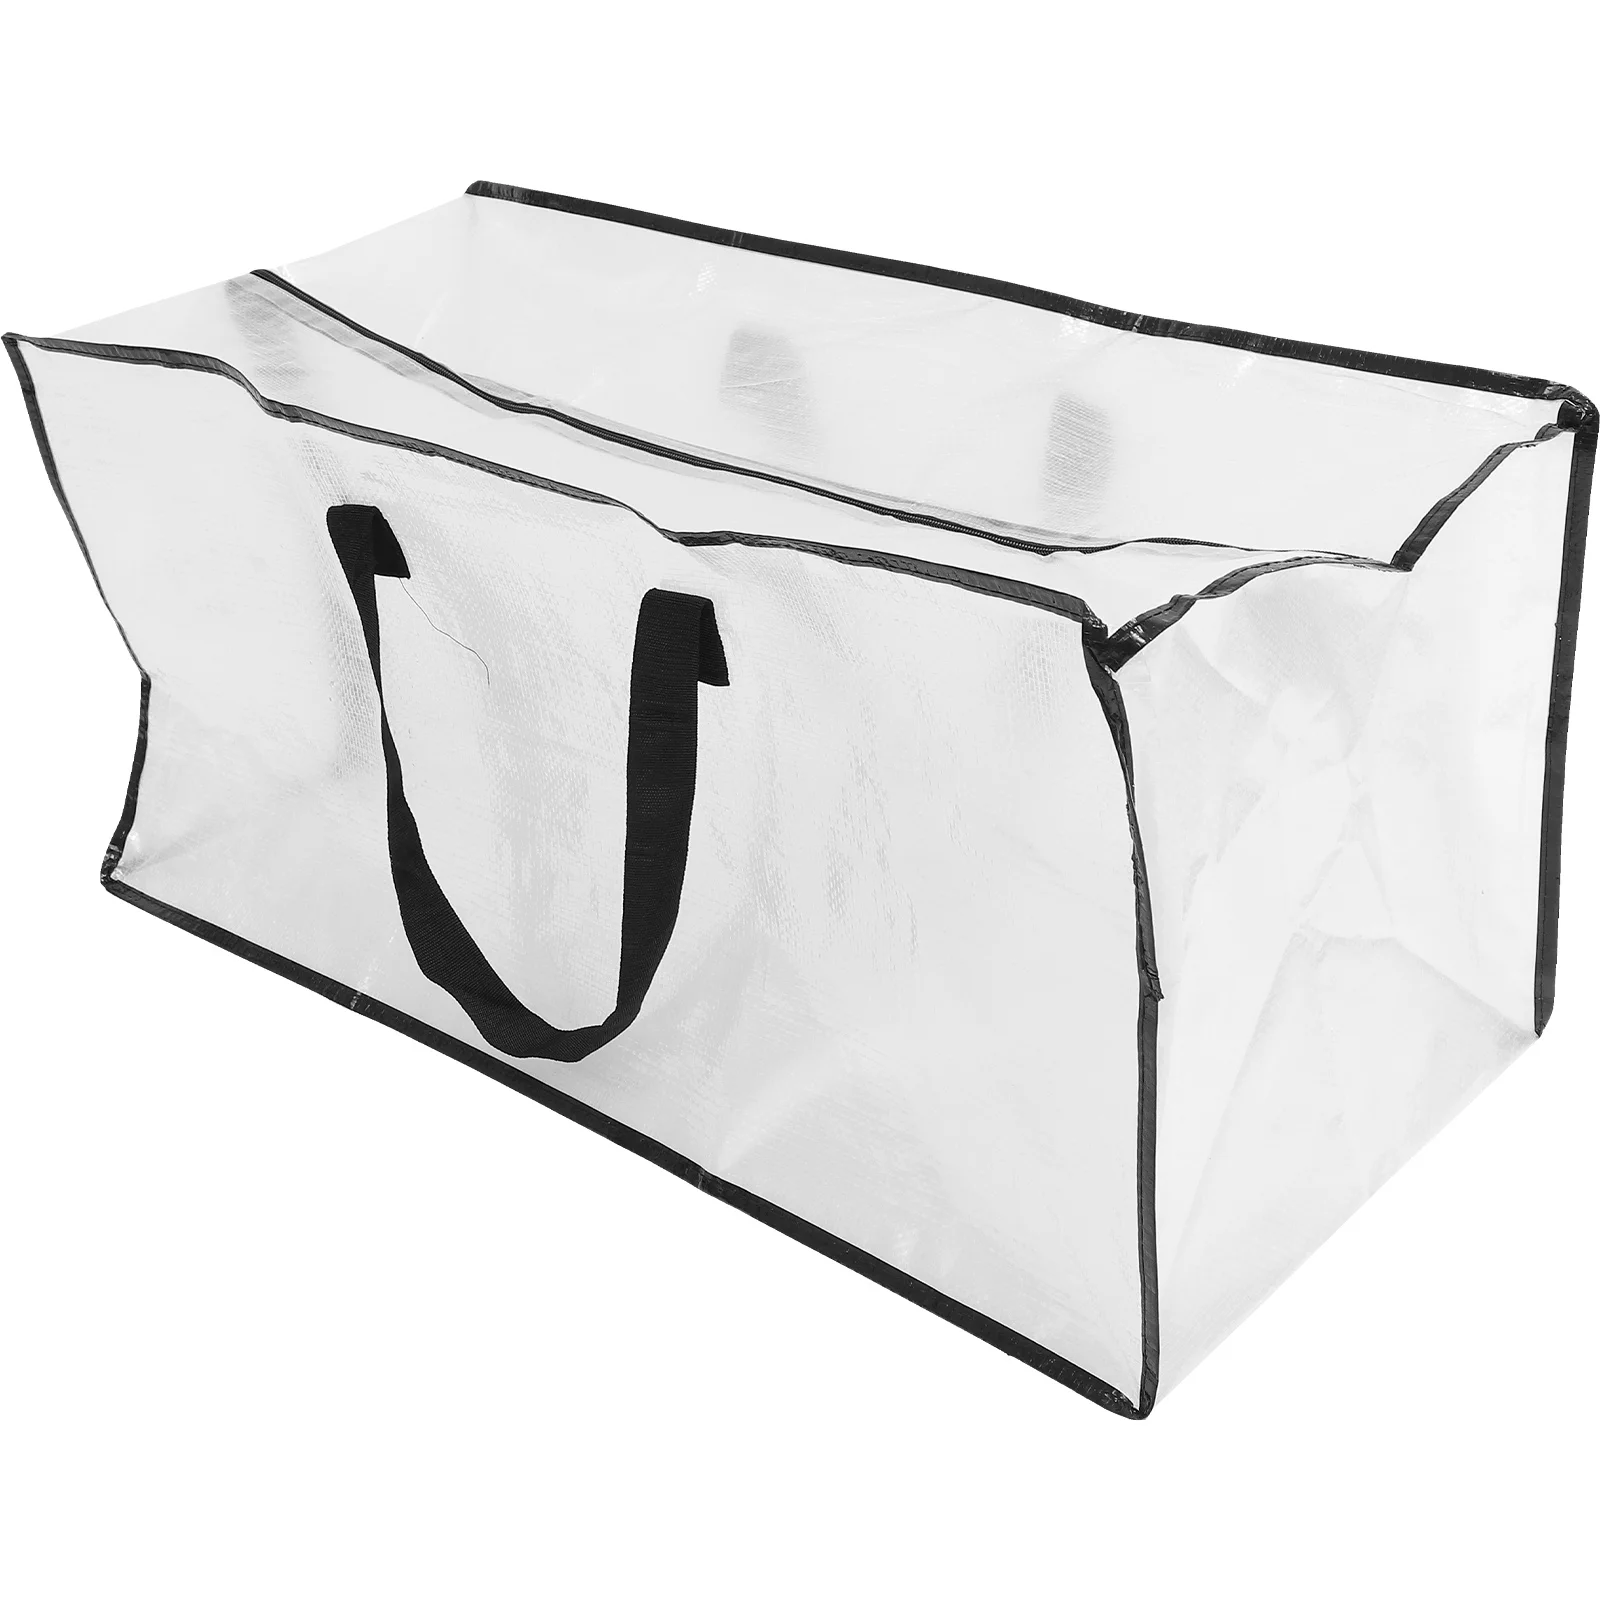 

Storage Bags Handbags Moving Packing Woven Duffel Waterproof Quilt Translucent Clear Bed Pillow Travel